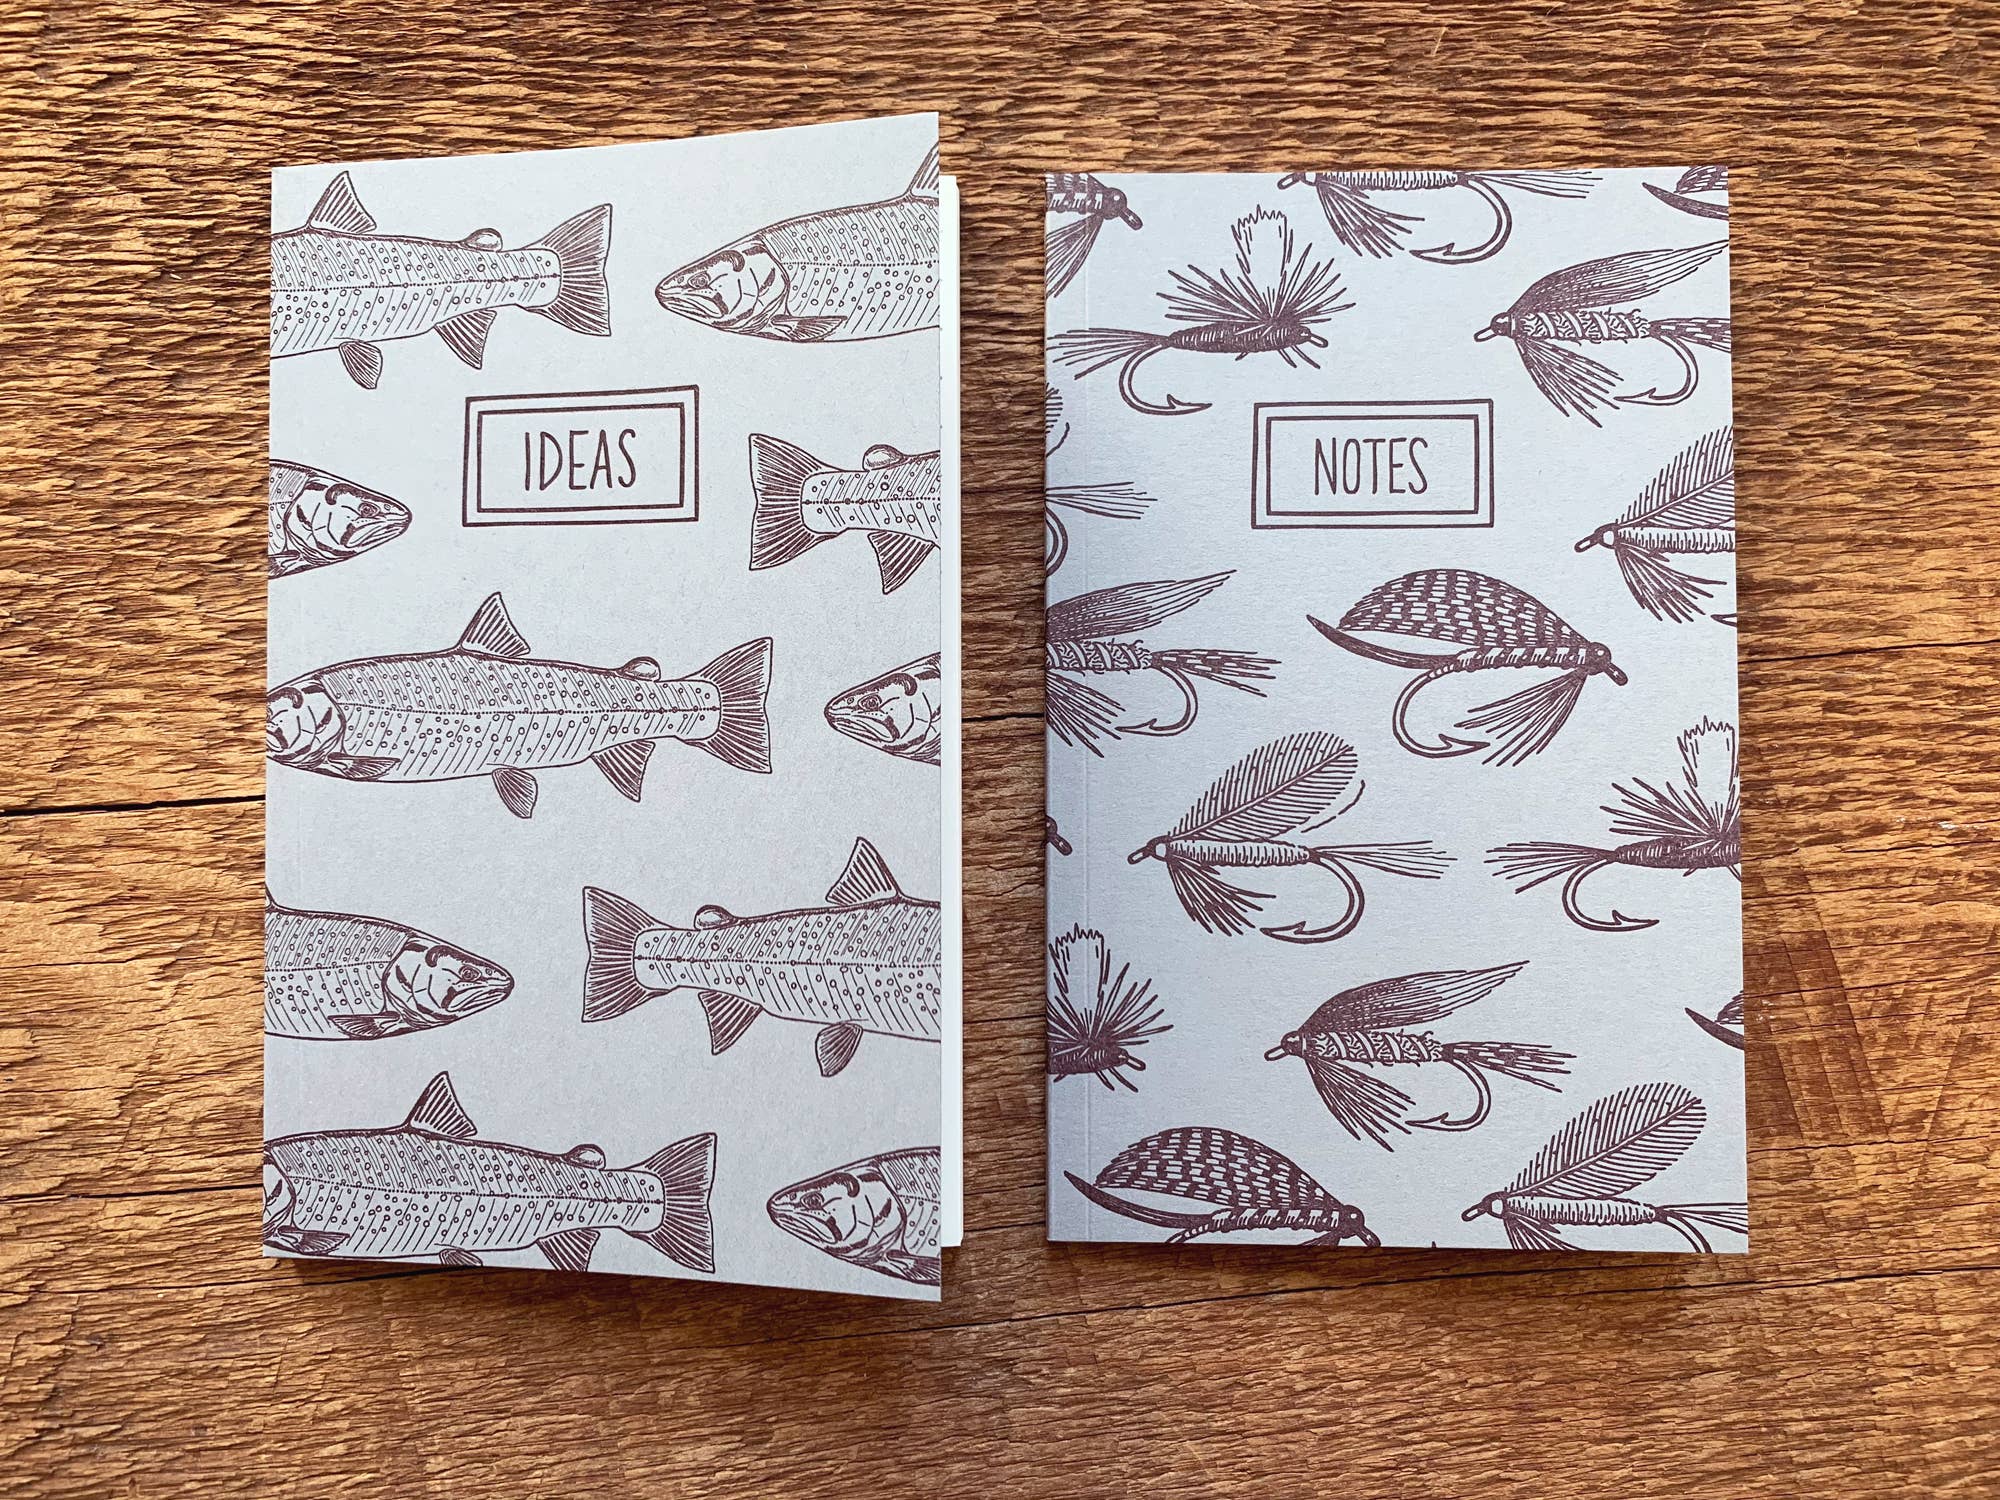 Trouts & Fishing Flies Pocket Notebook, Set of 2